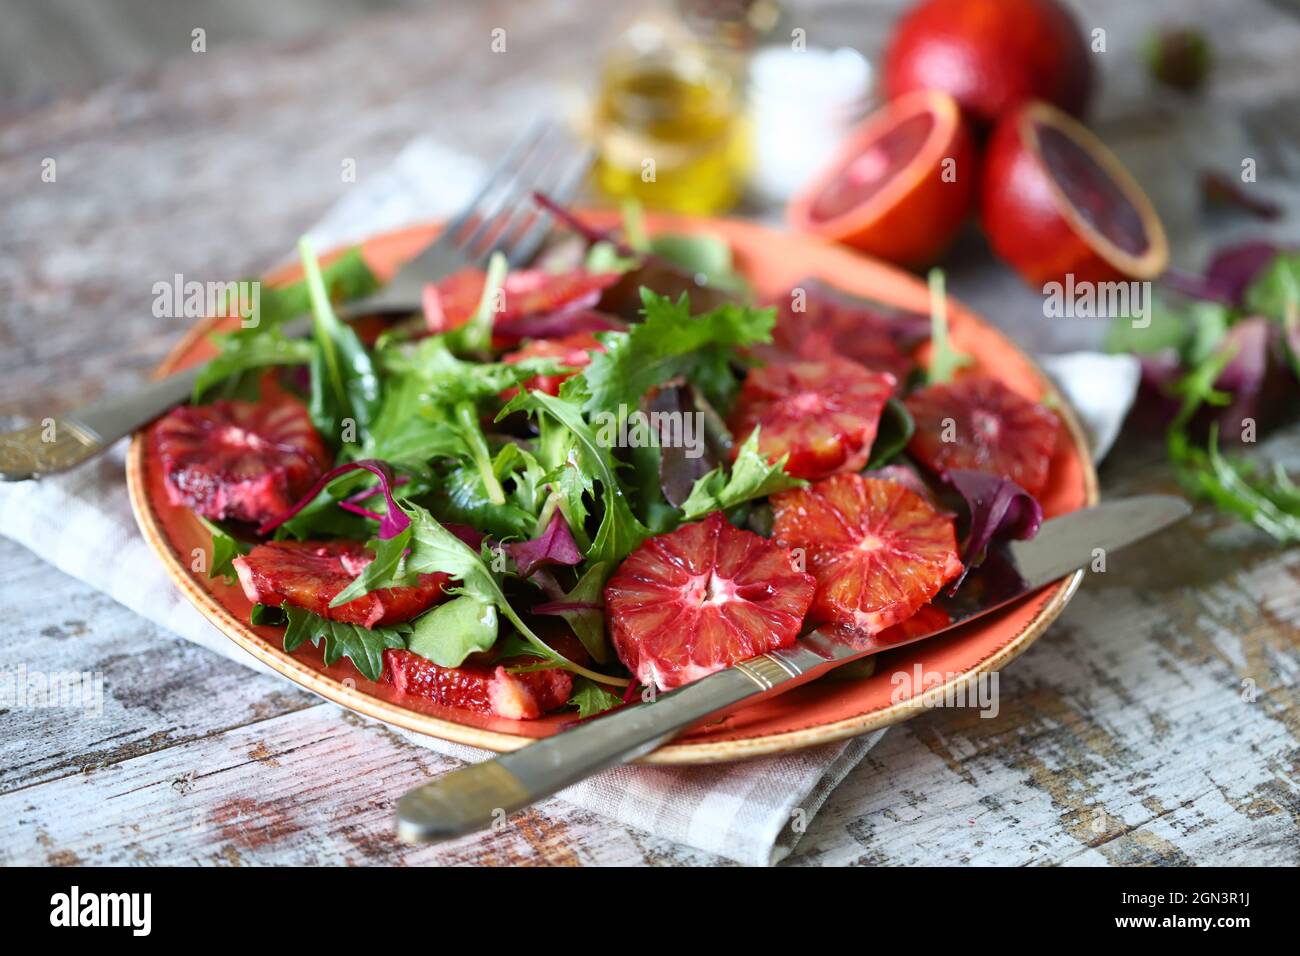 Super nutritious detox salad with red orange and mix of salads. Vegan diet. Diet food. Fitness nutrition. Stock Photo